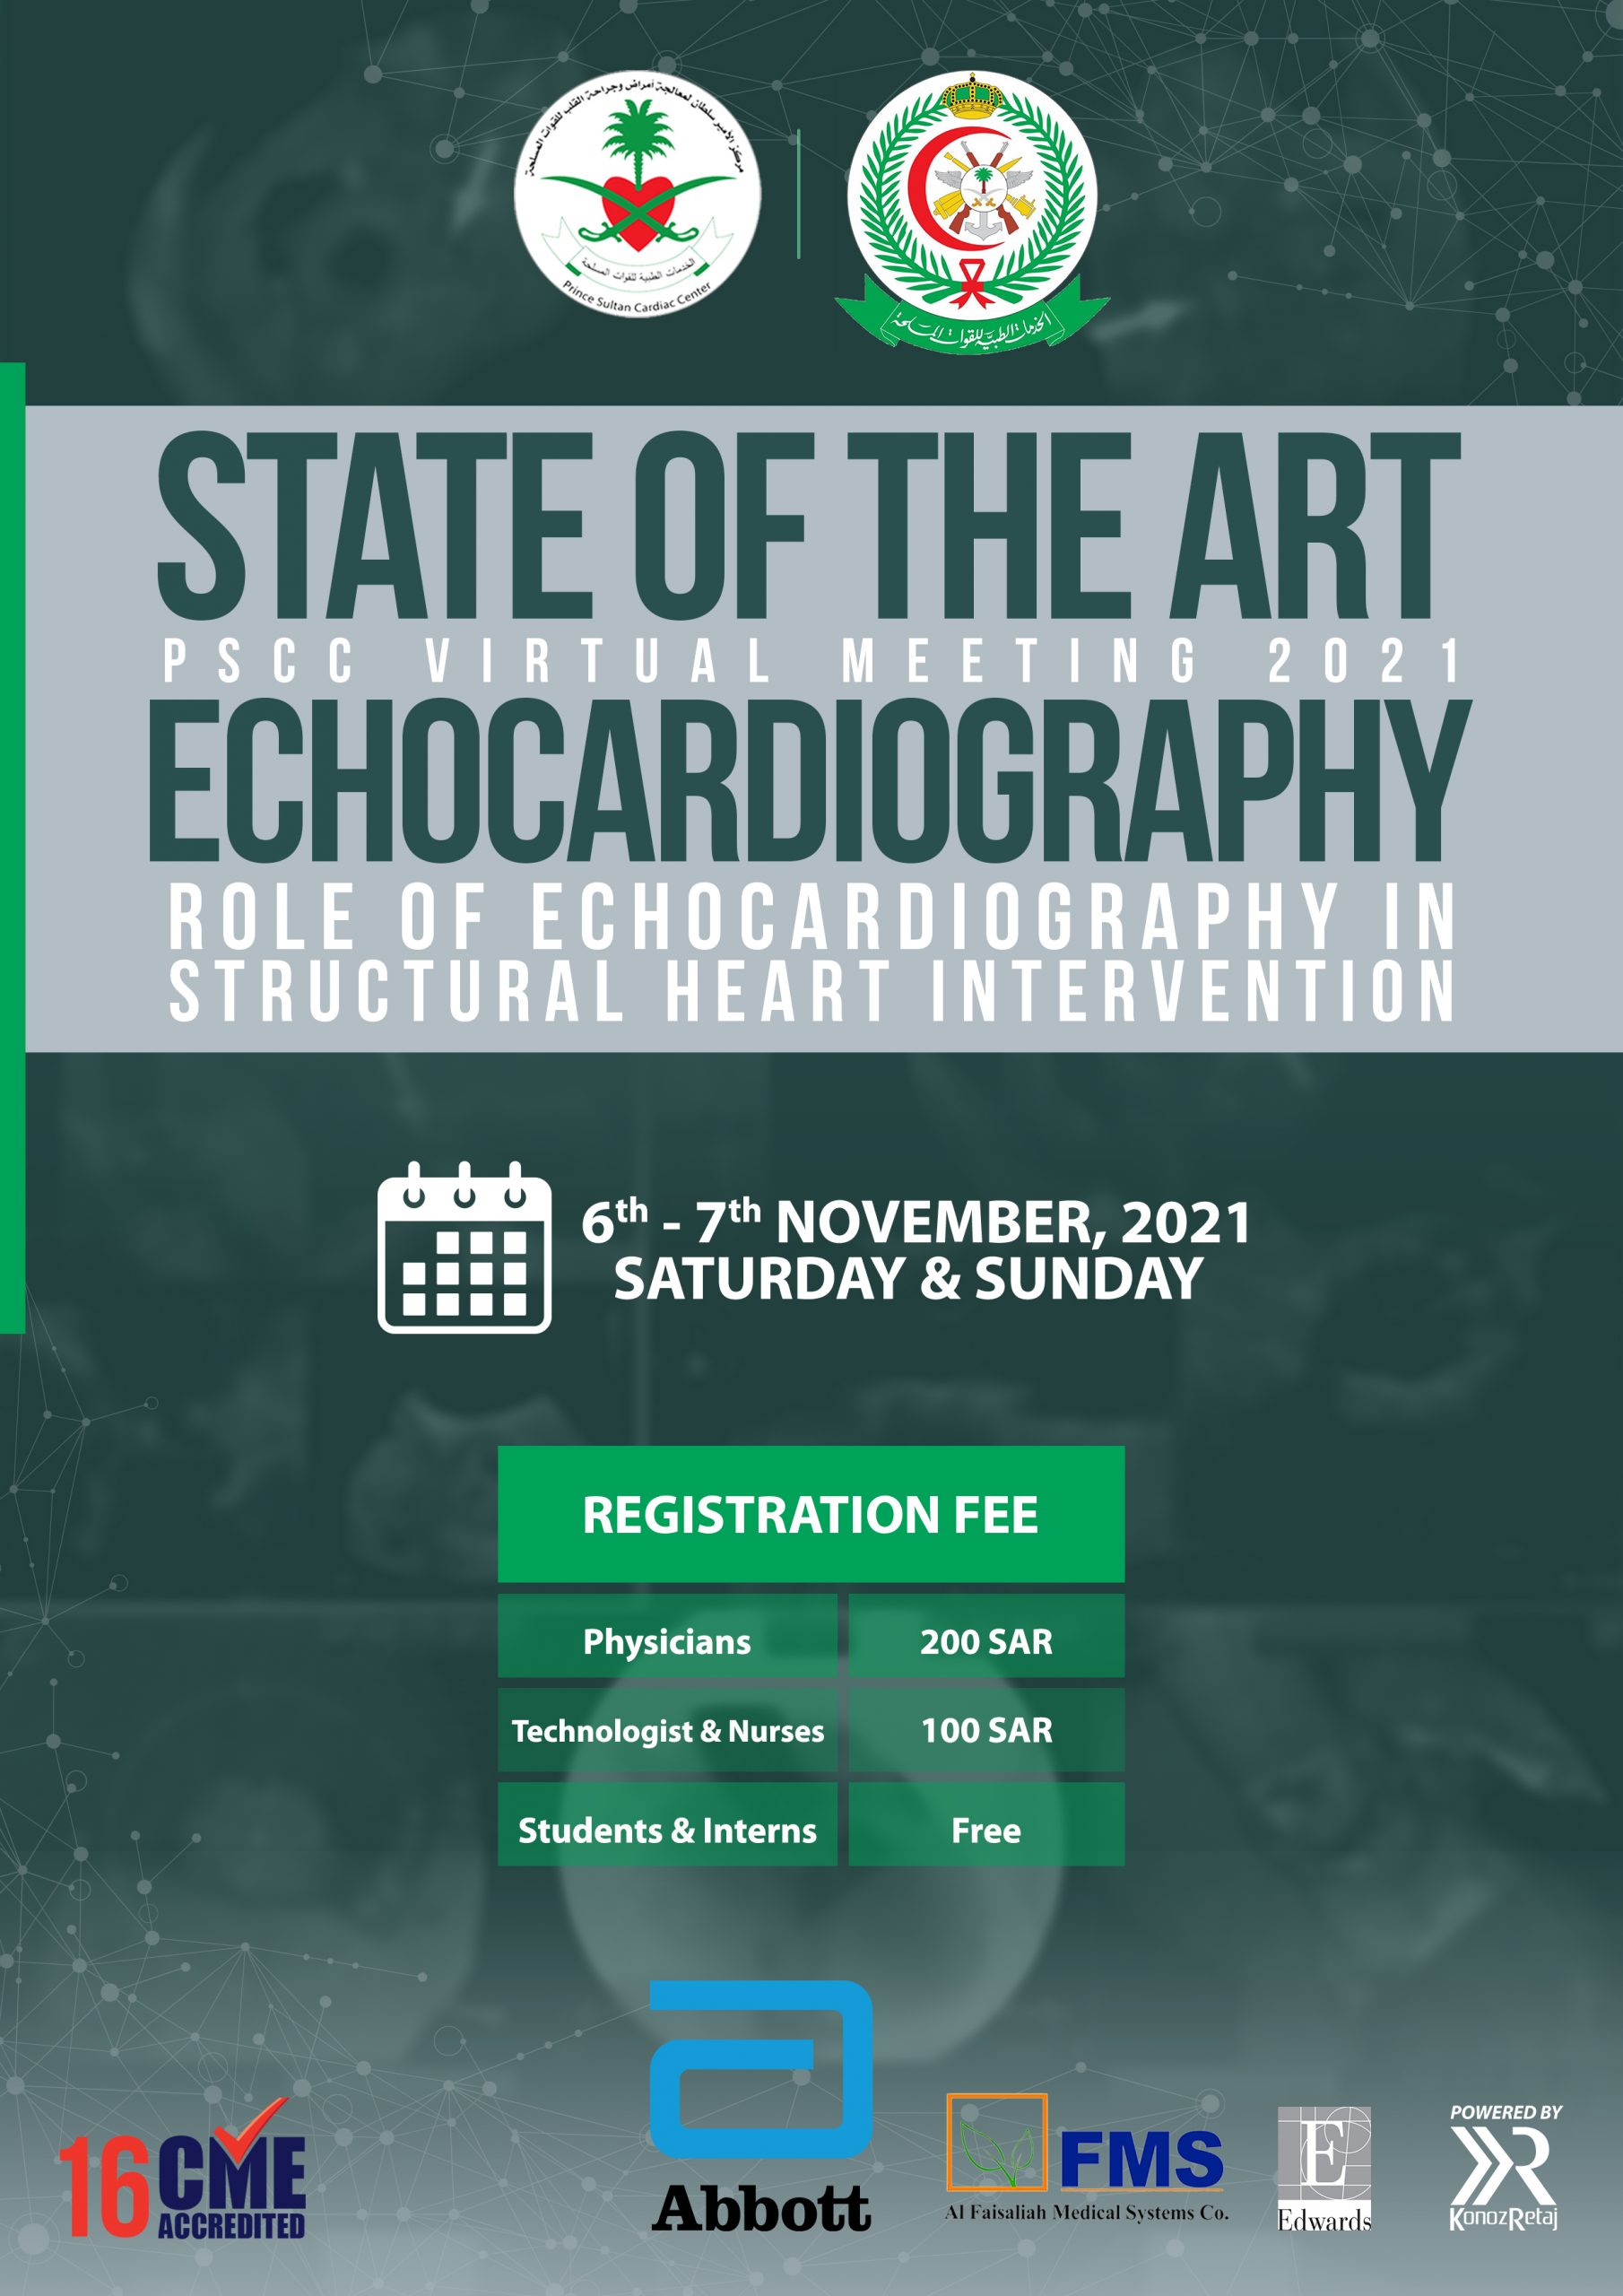 STATE OF THE ART ECHOCARDIOGRAPHY